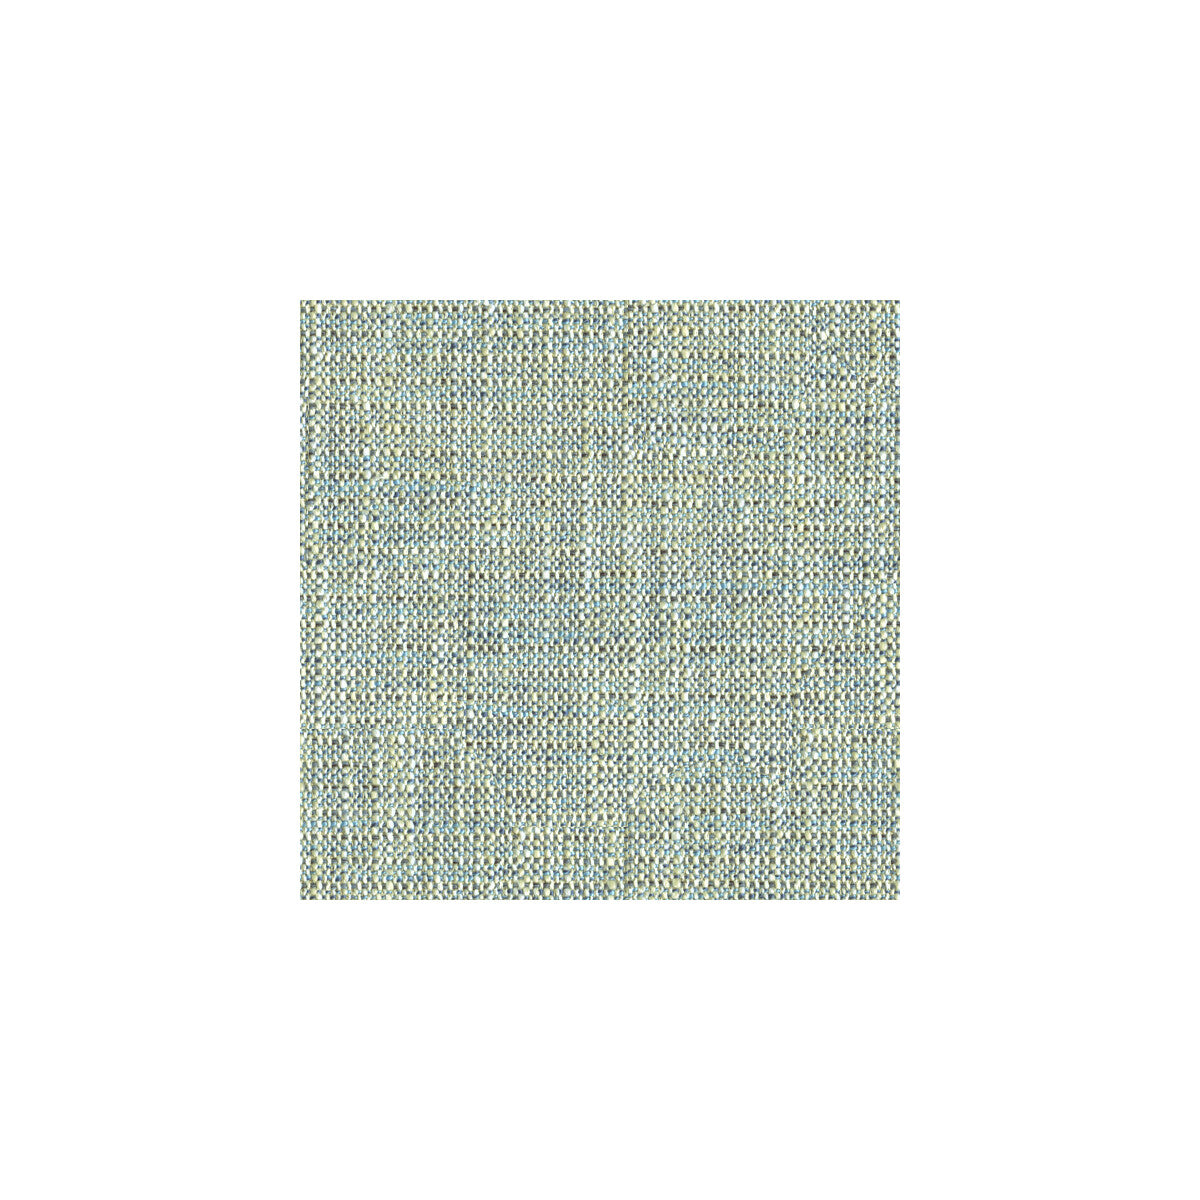 Lamson fabric in chambray color - pattern 32792.5.0 - by Kravet Basics in the Thom Filicia collection